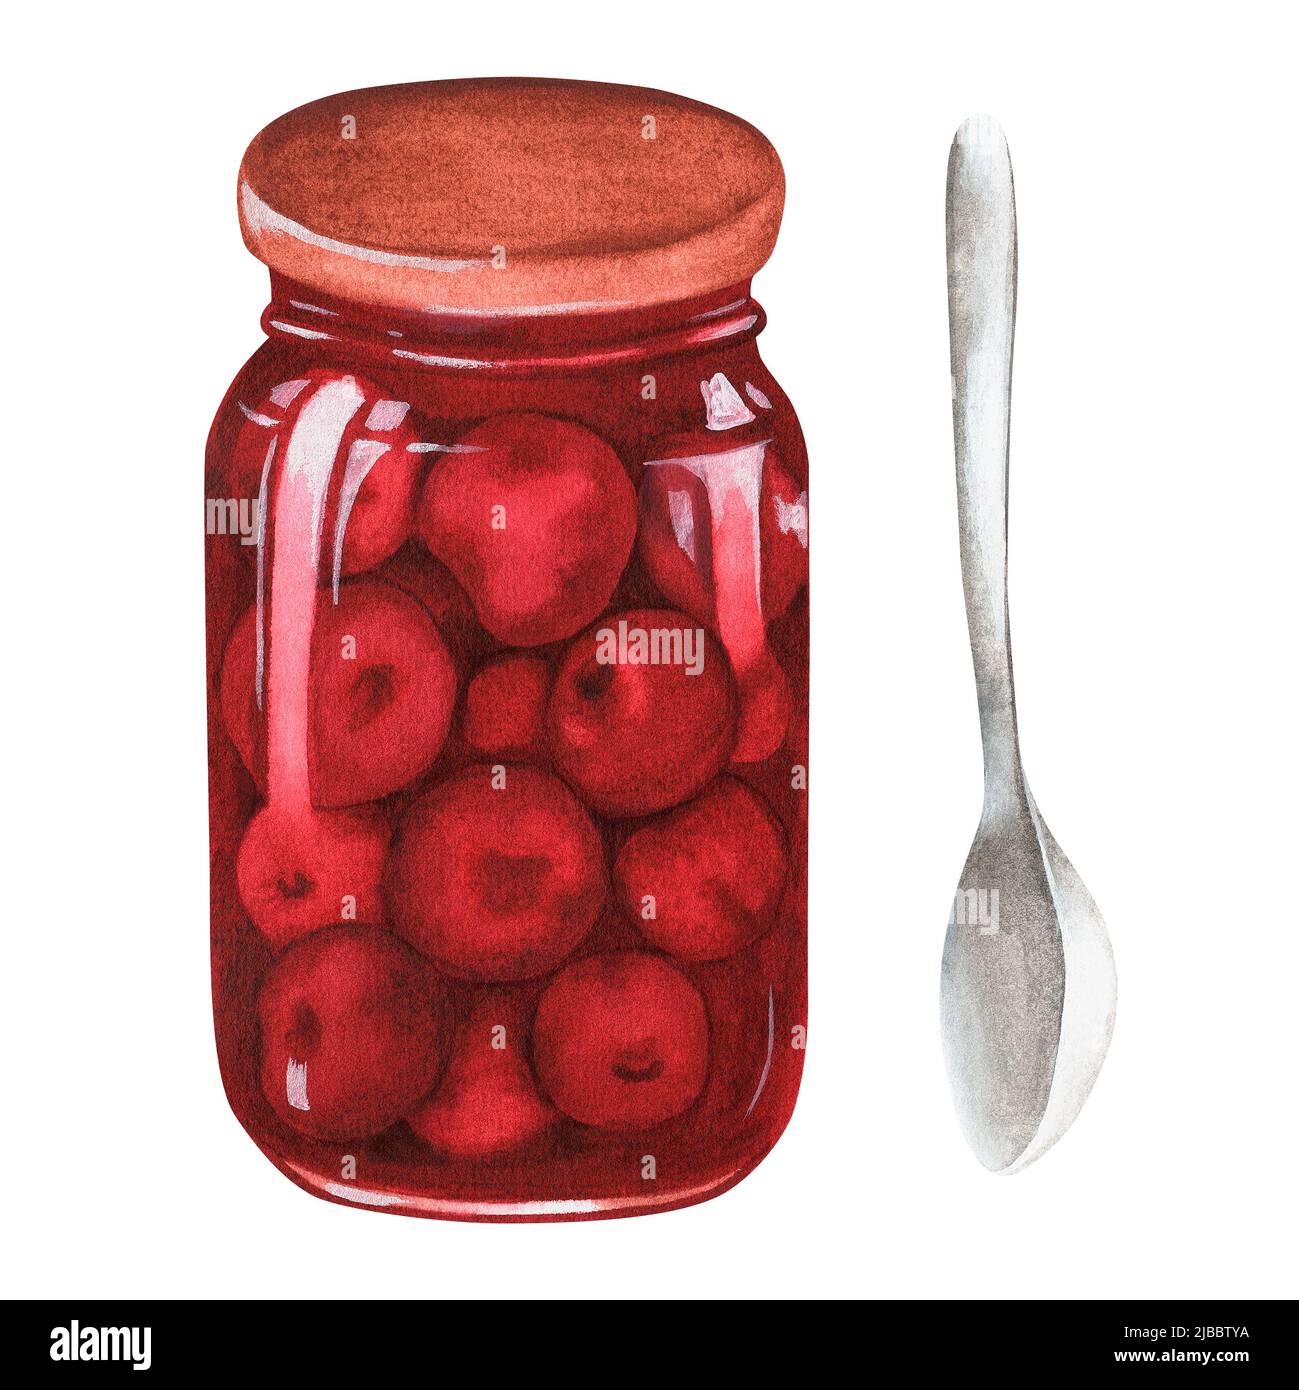 Cherry jam and a spoon. Watercolor illustration. Isolated on a white background. For your design. Suitable for cookbooks, recipes, aprons. Stock Photo